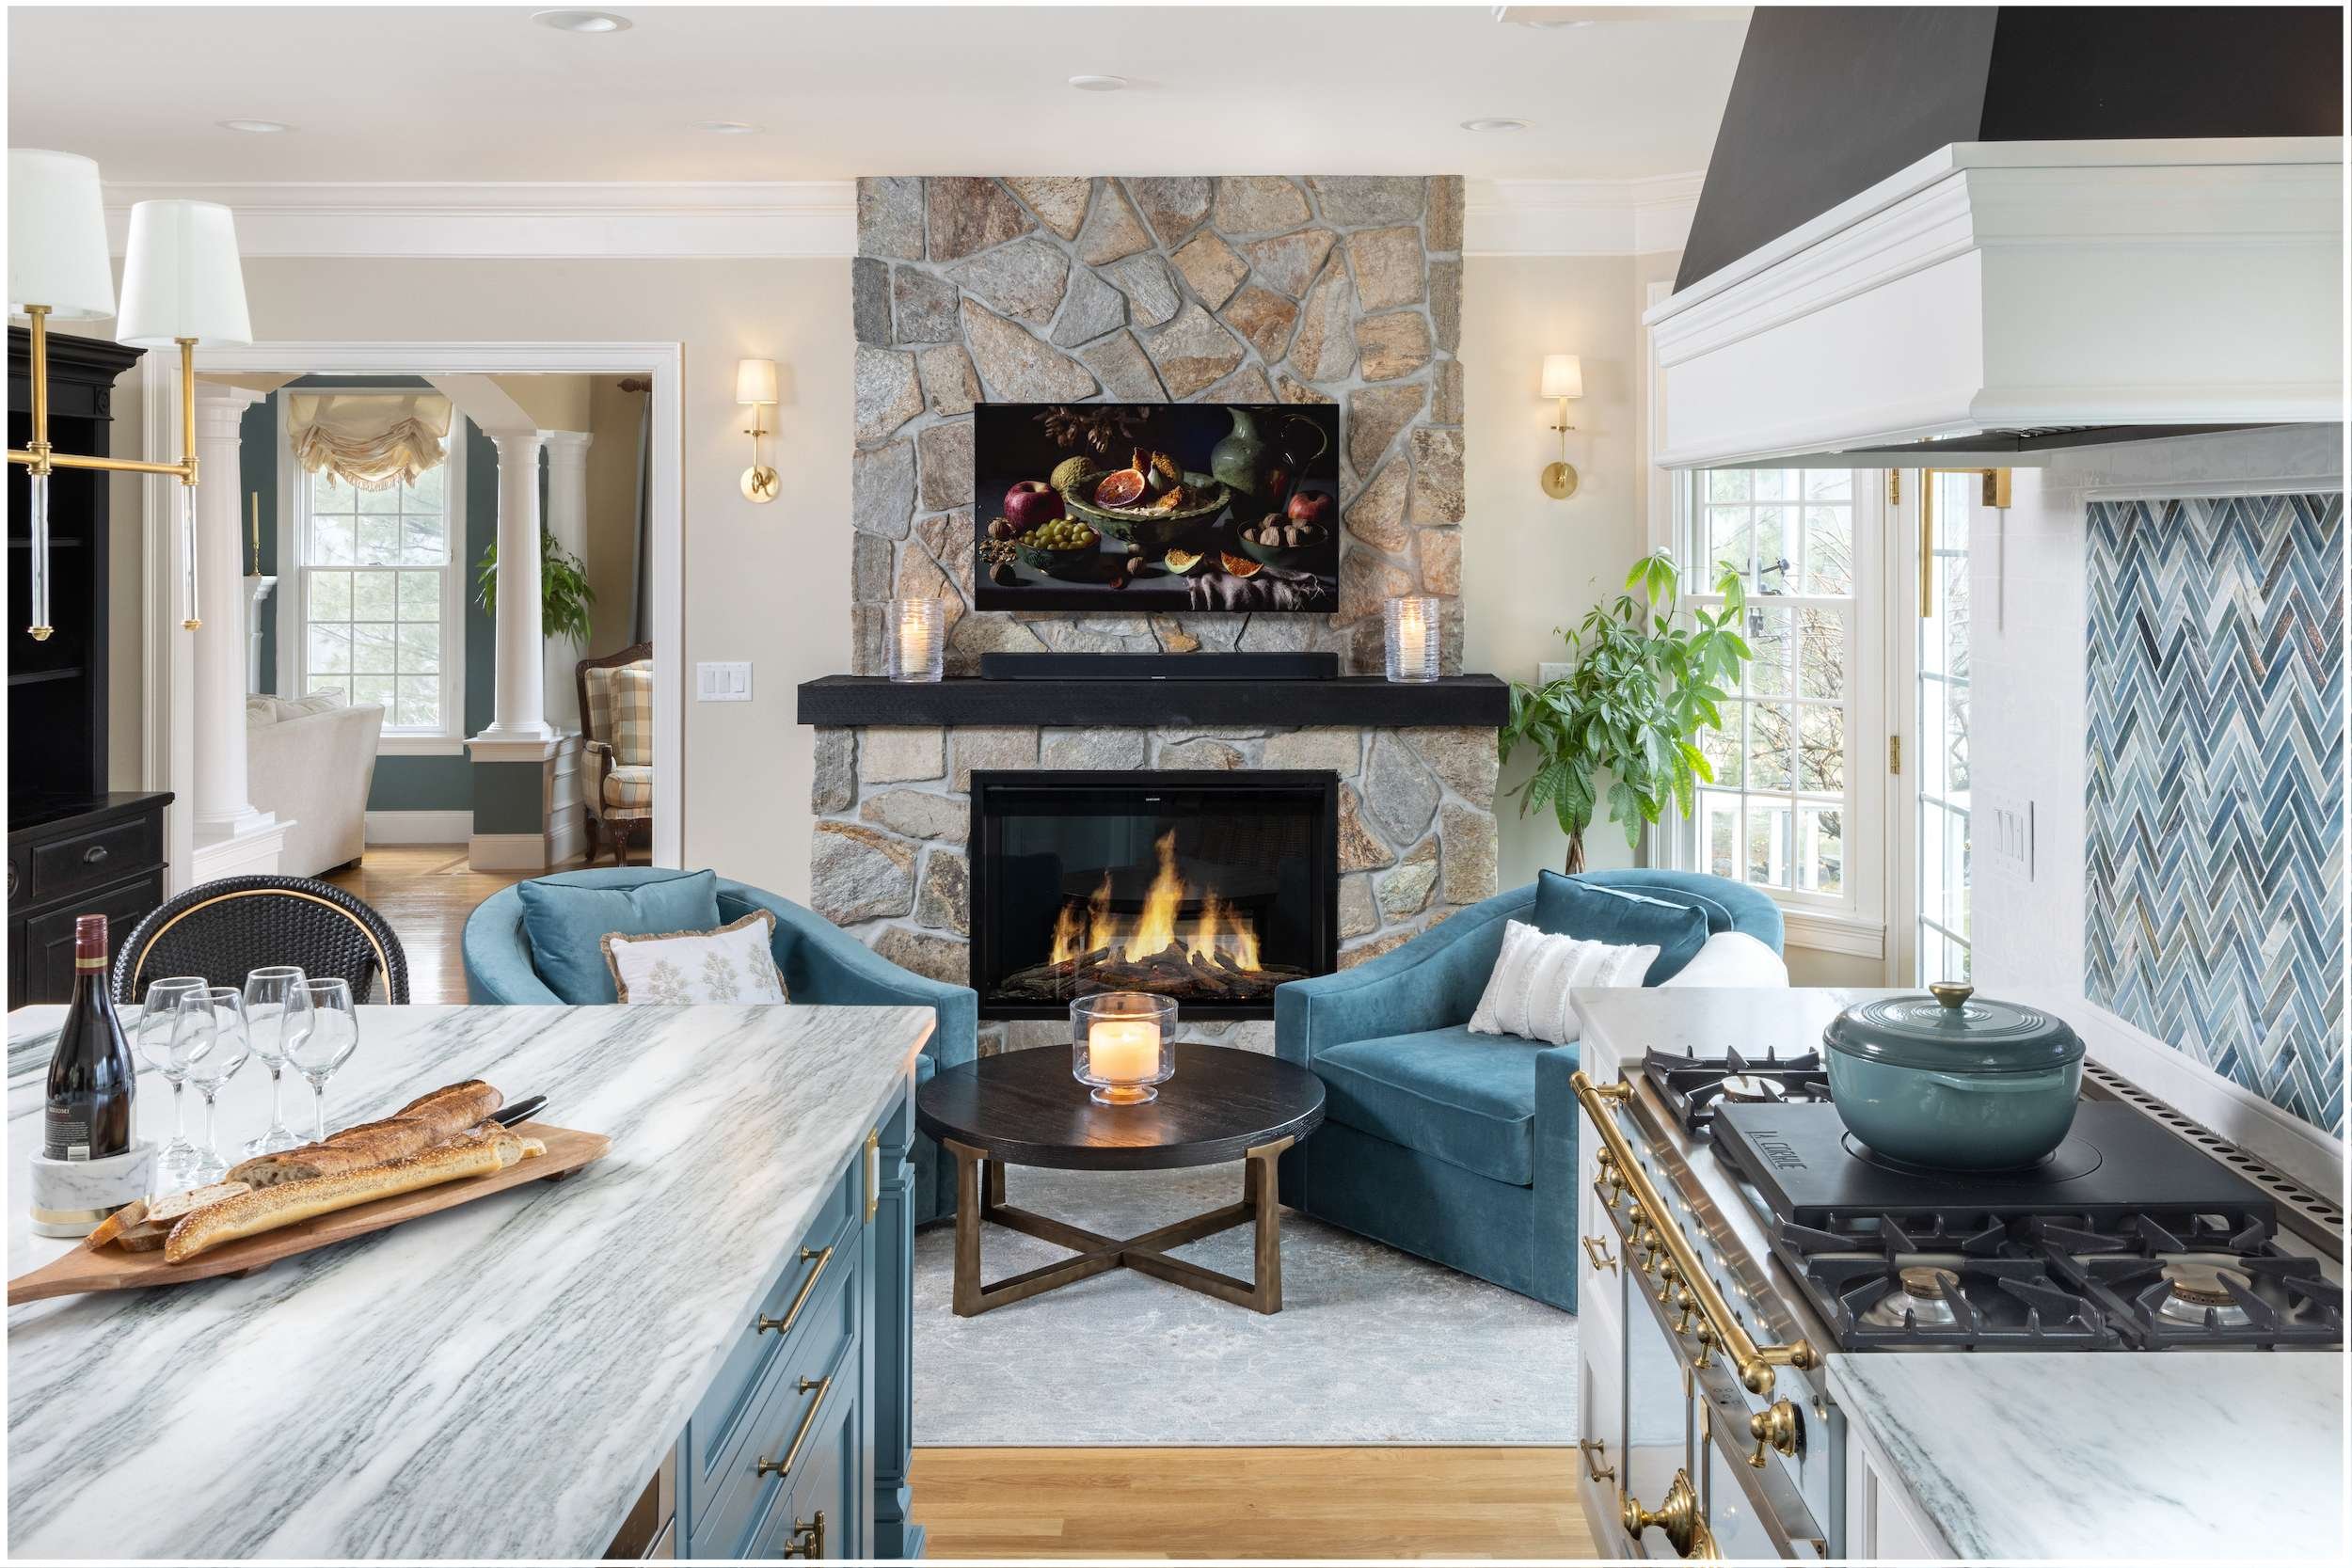 Fireside Gourmet Kitchen Fireplace Wall + Range View Sudbury MA KITCHENVISIONS residential space planning kitchen design.jpg